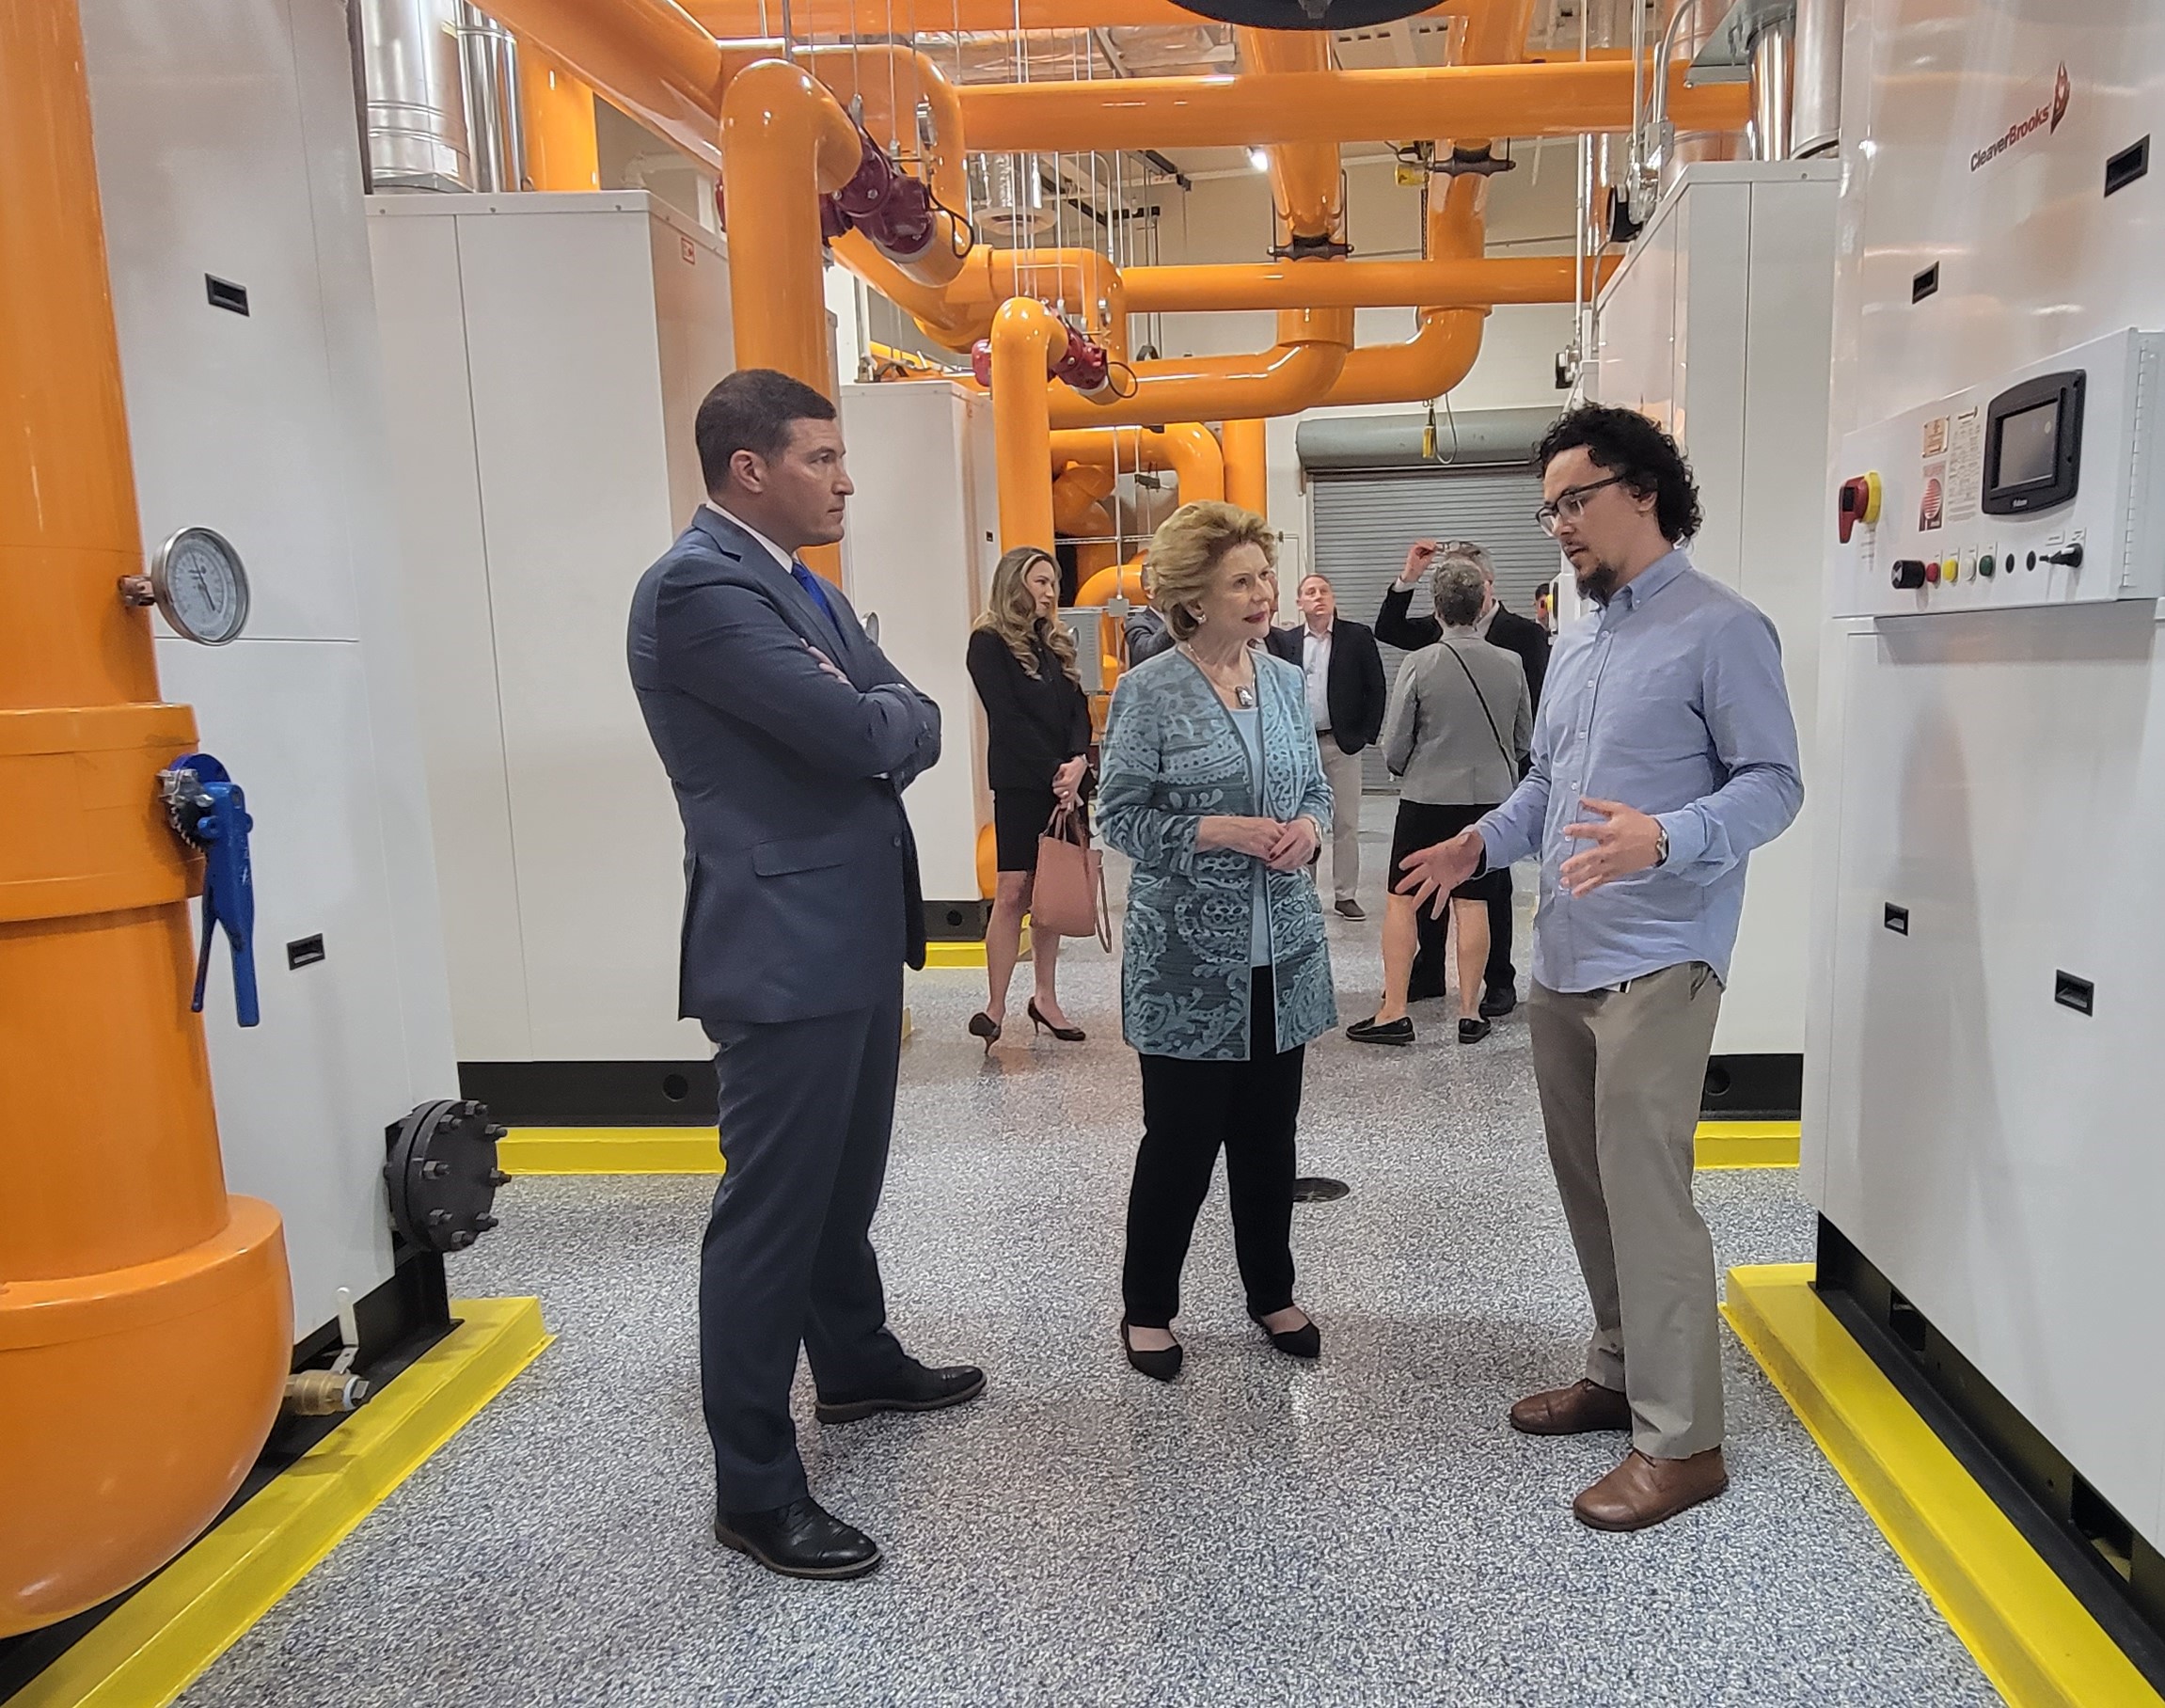 Nicholas Paseiro, Henry Ford College’s IEMP Coordinator, speaking to Sen. Debbie Stabenow and Henry Ford College President Russ Kavalhuna during a tour of HFC’s state-of-the-art Energy Center. Photo courtesy HFC Marketing and Communications